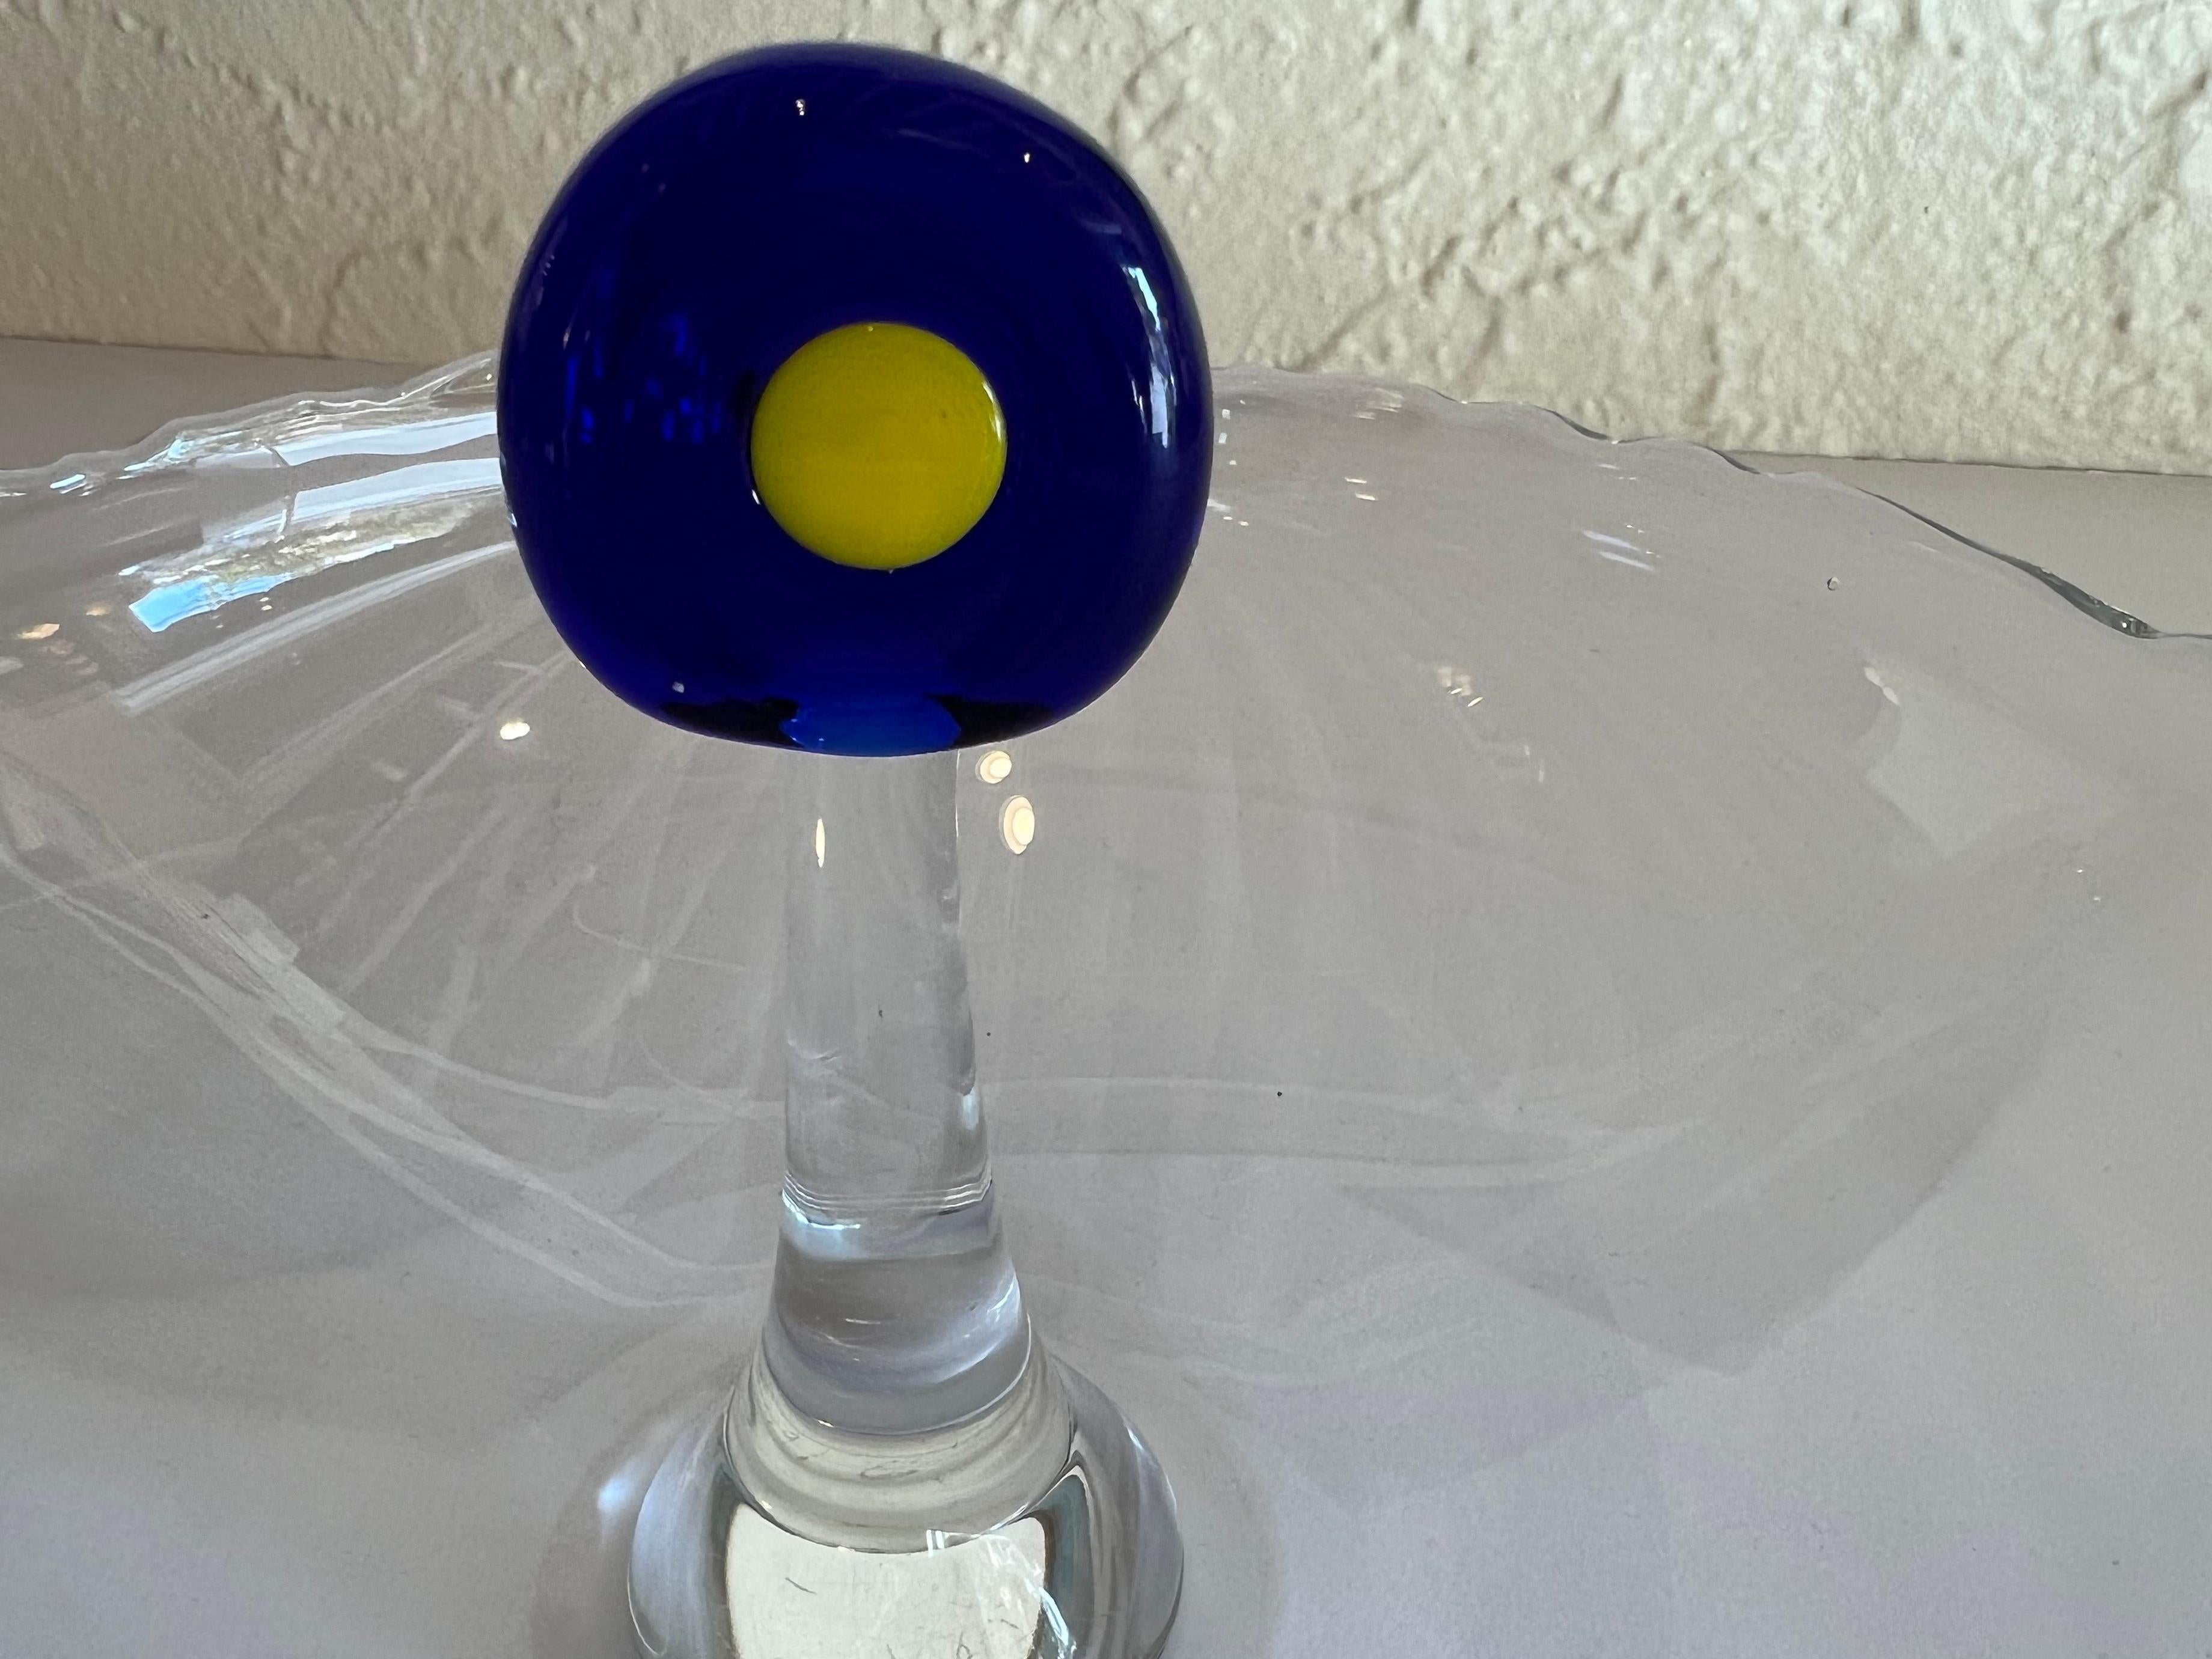 Delicate Mid-Century Modern crystal bowl signed by the artist MP. The crystal has a central knob painted with a blue and yellow circle on the top part. 
The bowl is marked on the bottom with a 